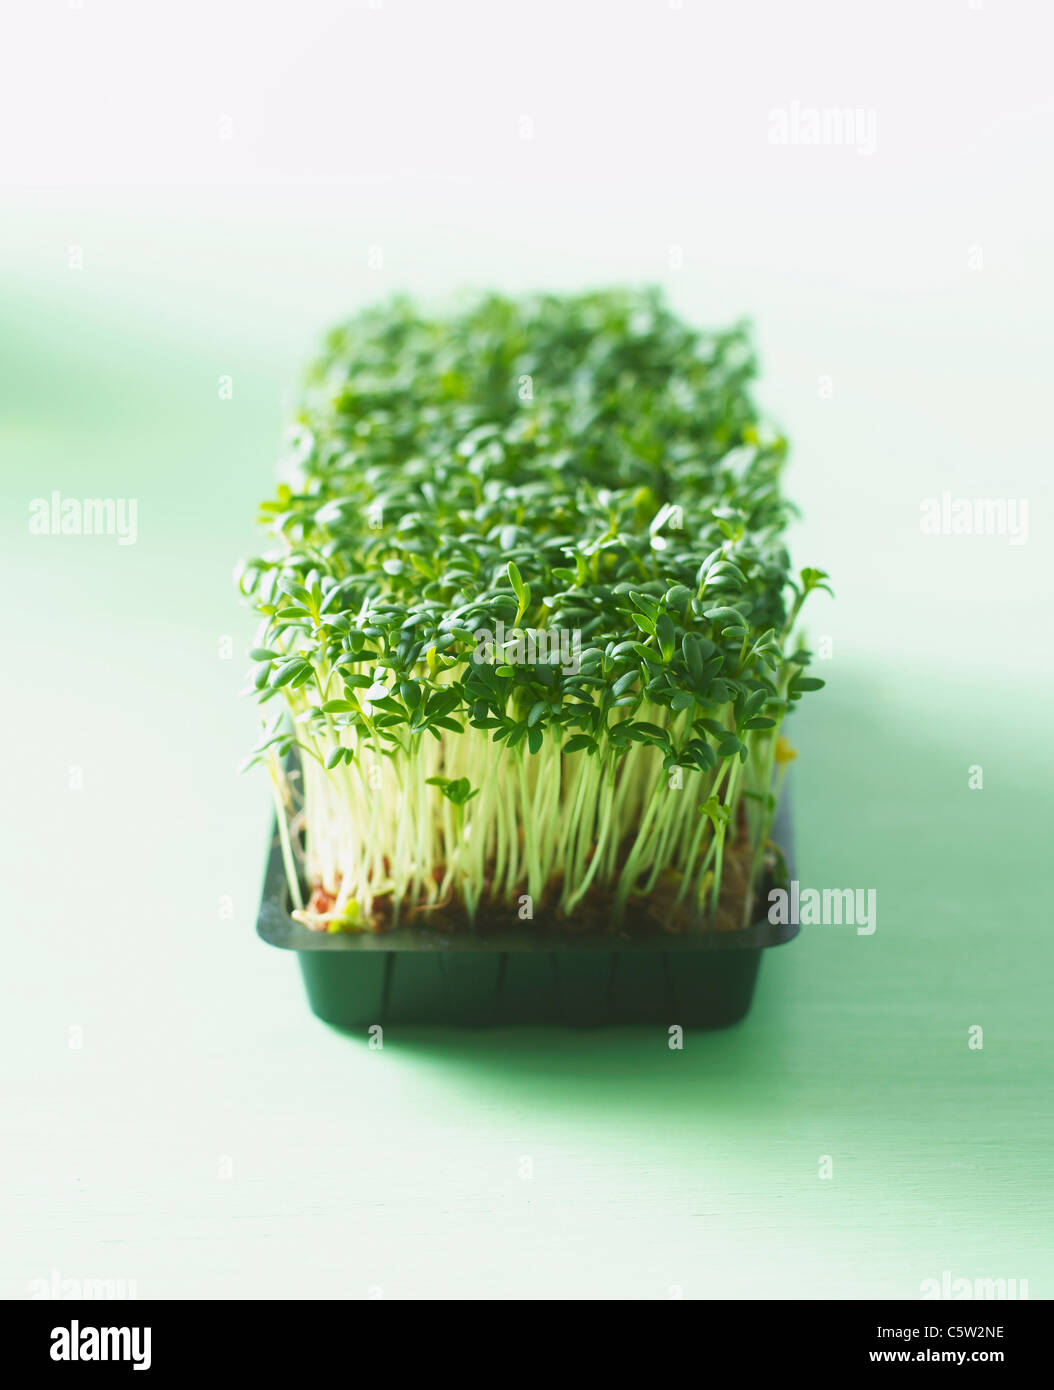 Cress sprouts Stock Photo